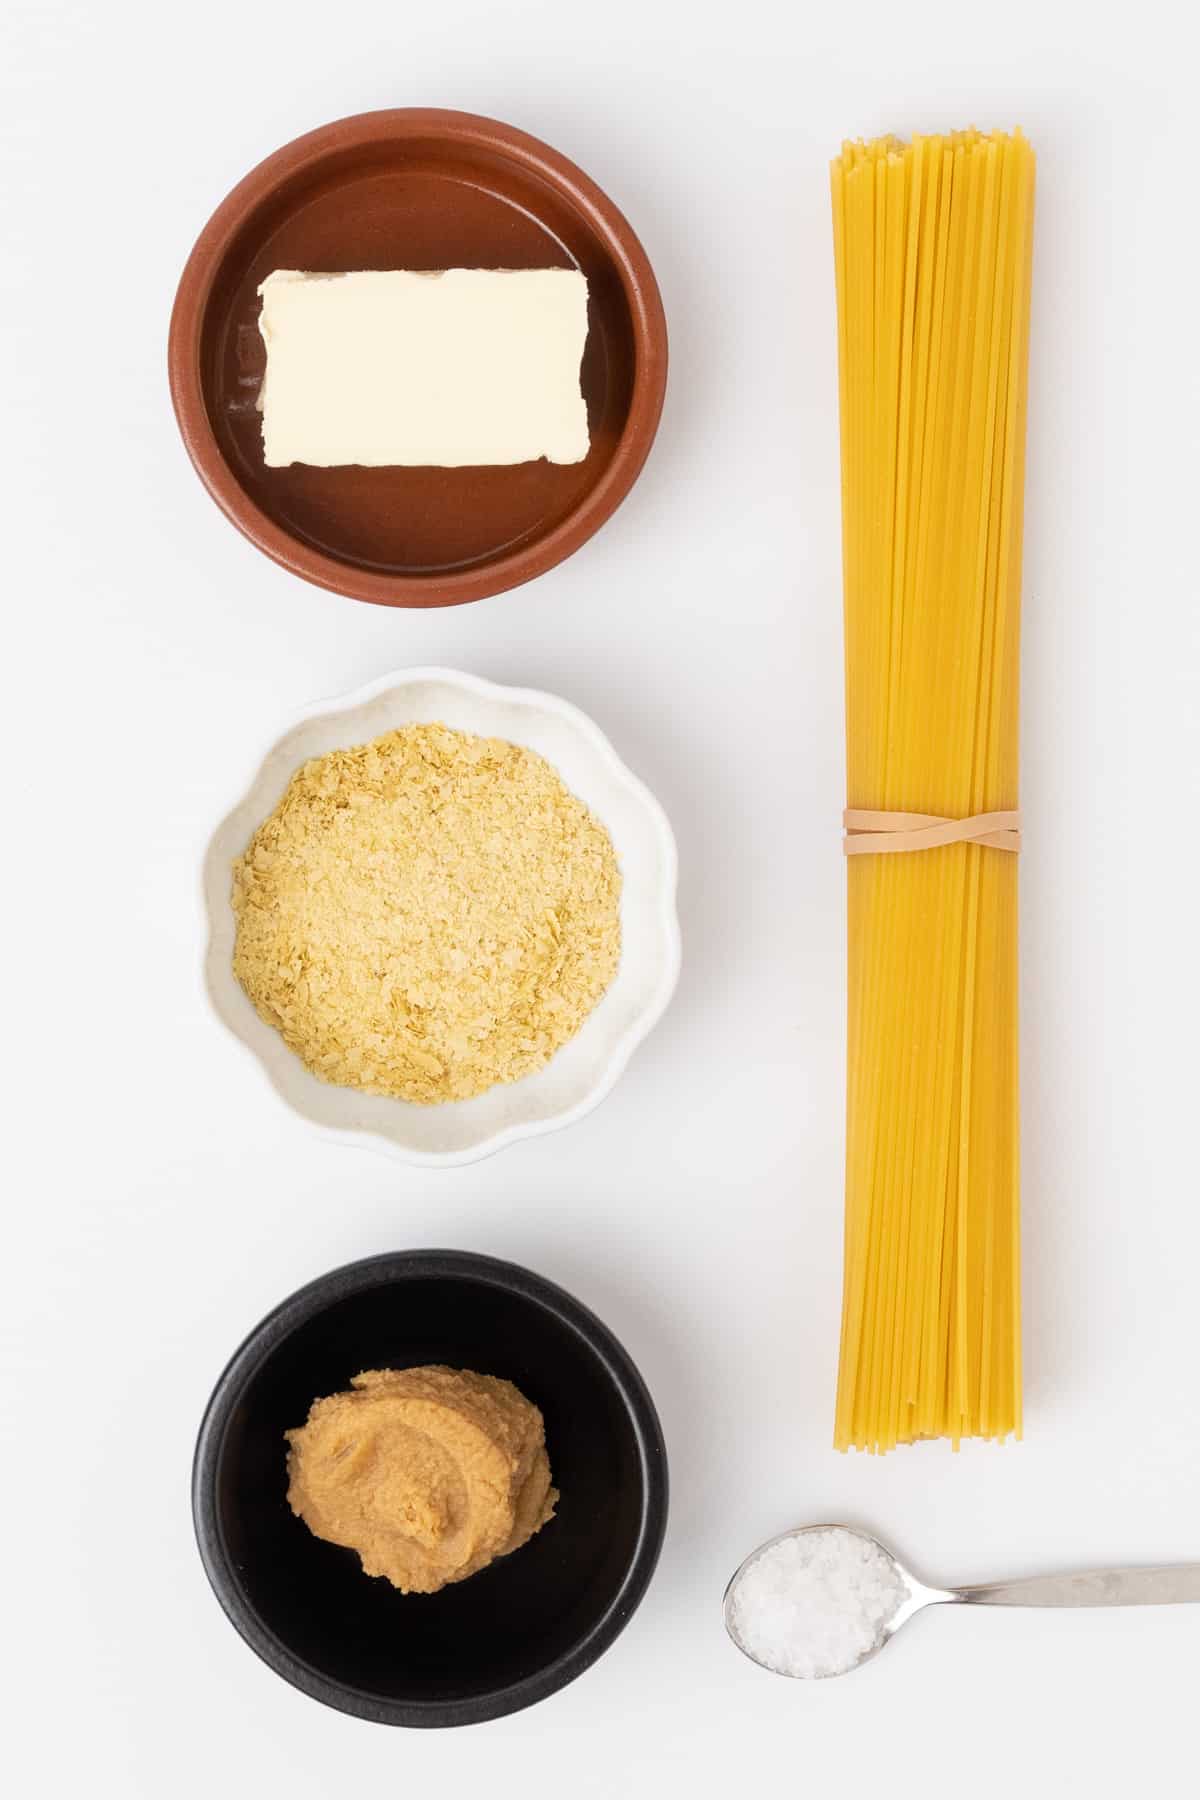 Ingredients for the miso pasta: spaghetti, vegan butter, white miso paste, nutritinonal yeast and salt for cooking the pasta.